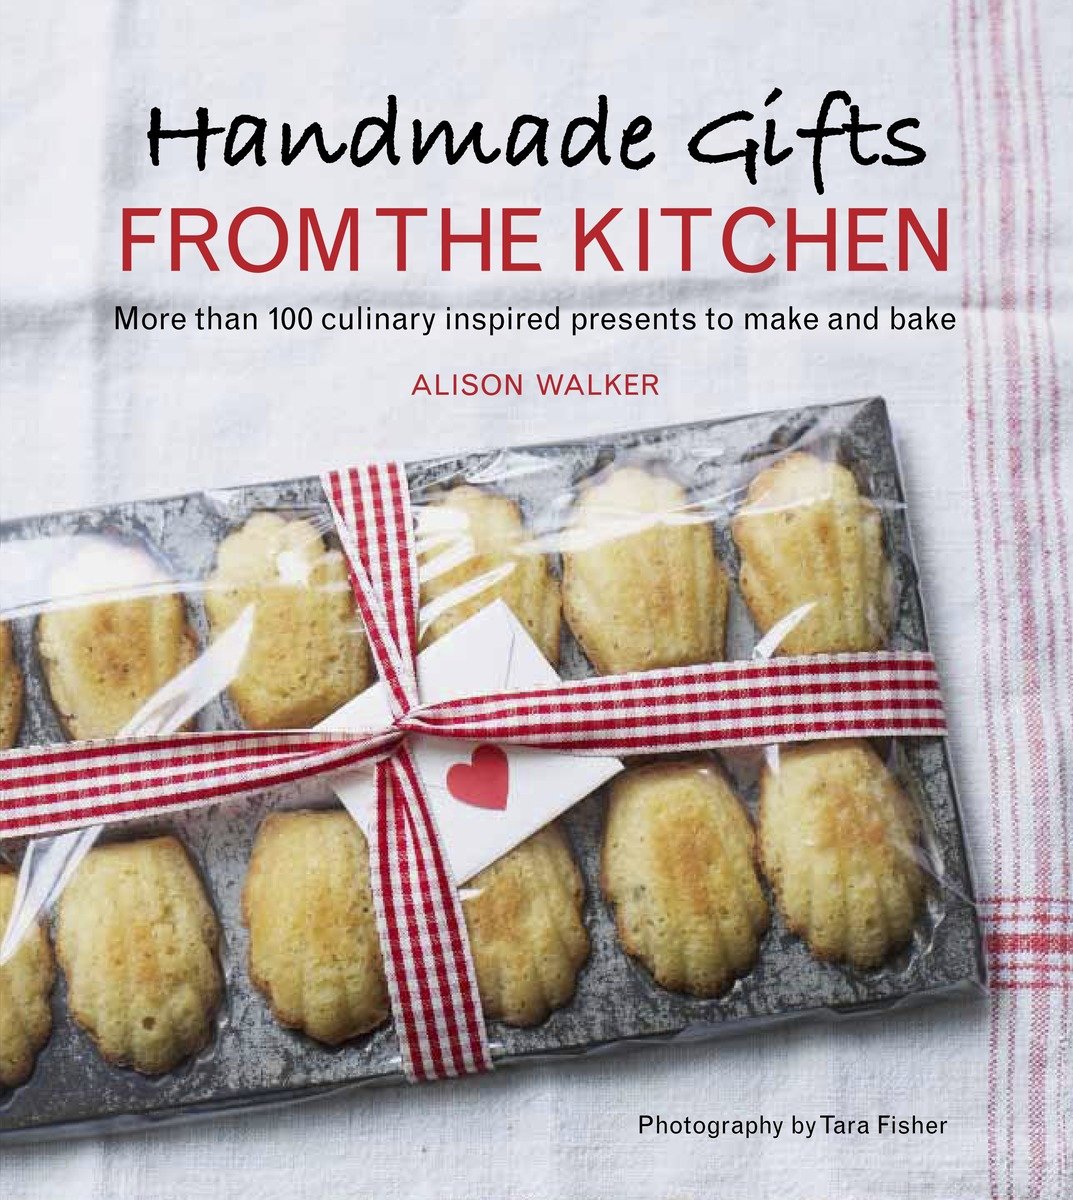 Handmade Gifts From The Kitchen (Hardcover Book)